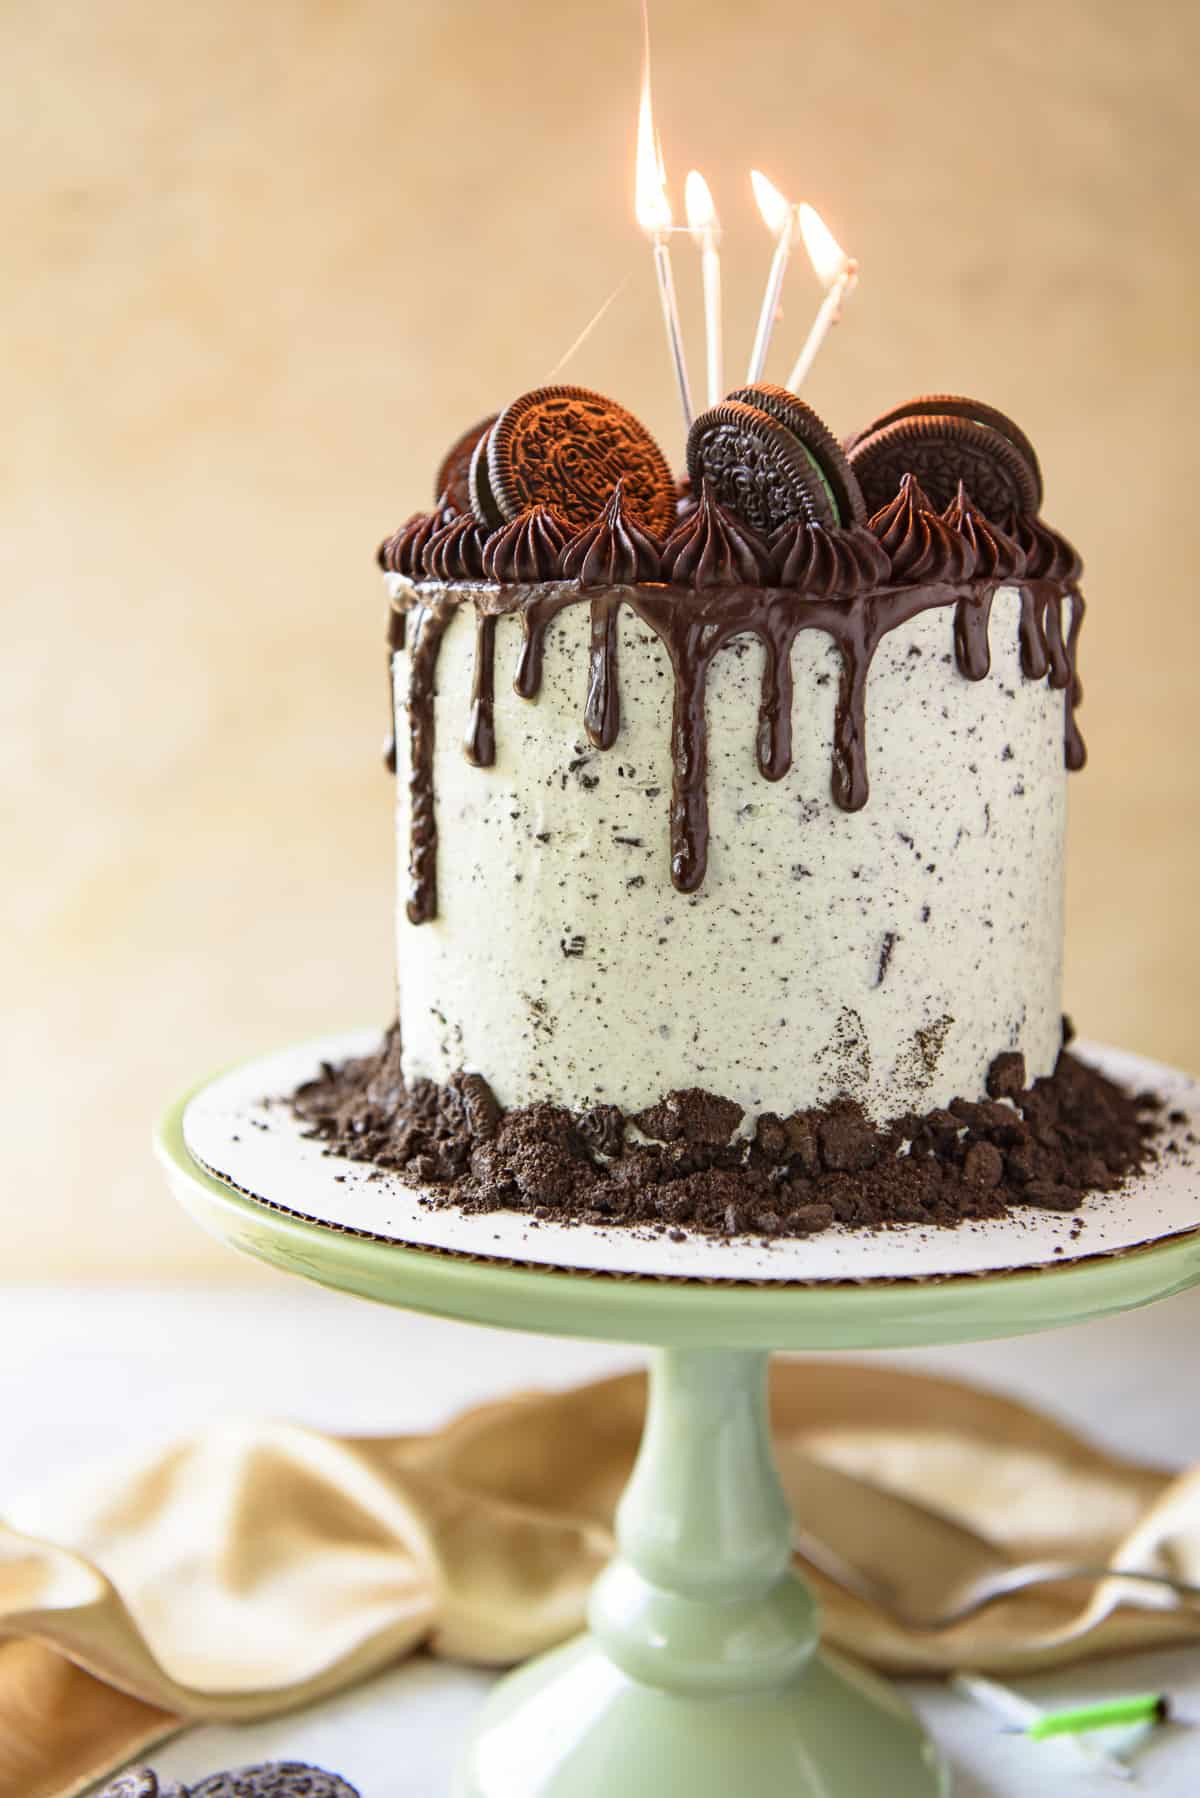 Fabulous Birthday Cakes
 Mint Oreo Cookies and Cream Cake • The Crumby Kitchen